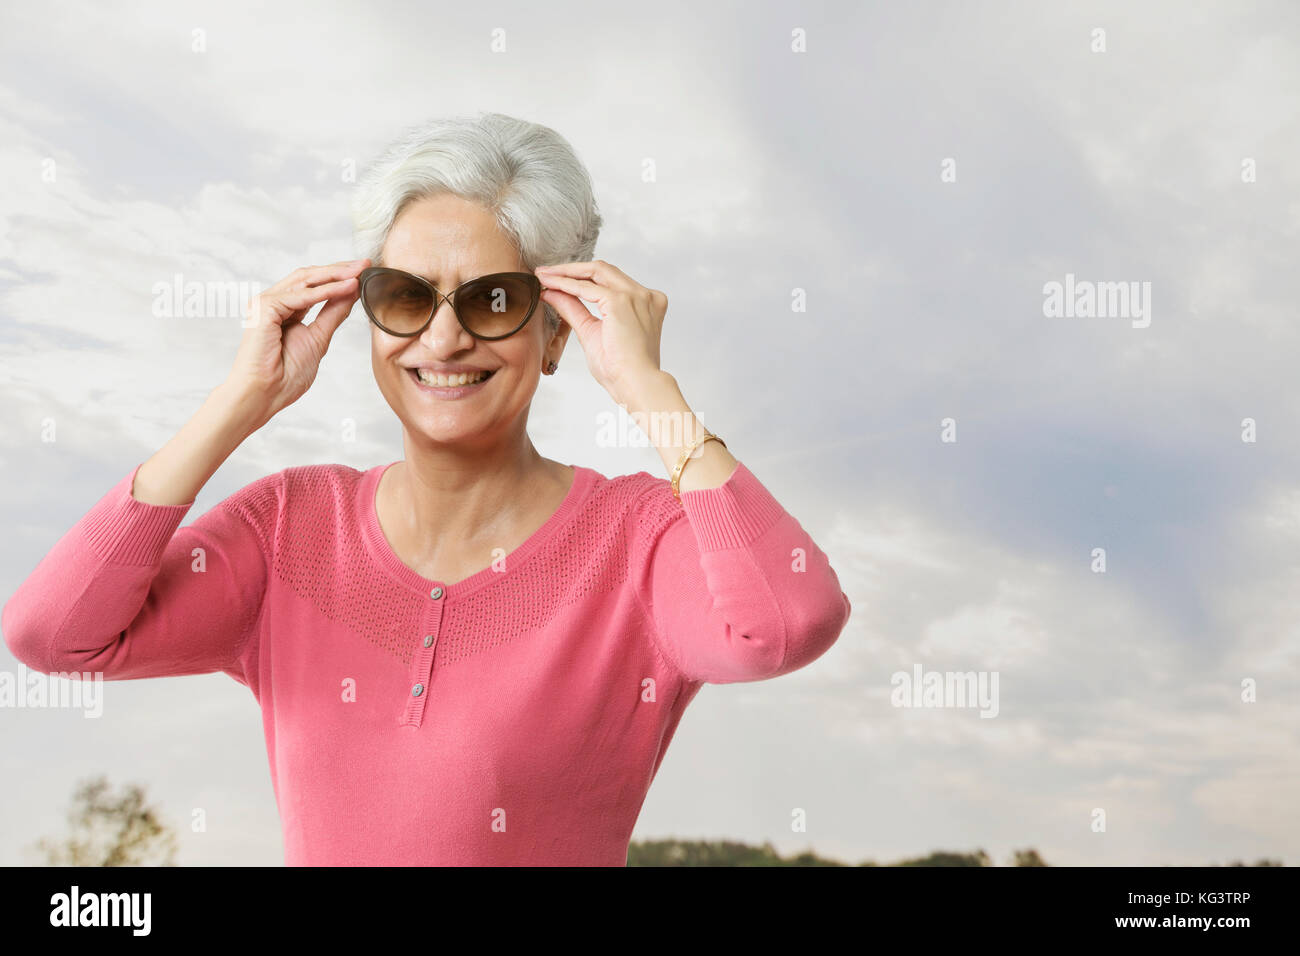 Smiling senior woman wearing sunglasses outdoors Banque D'Images